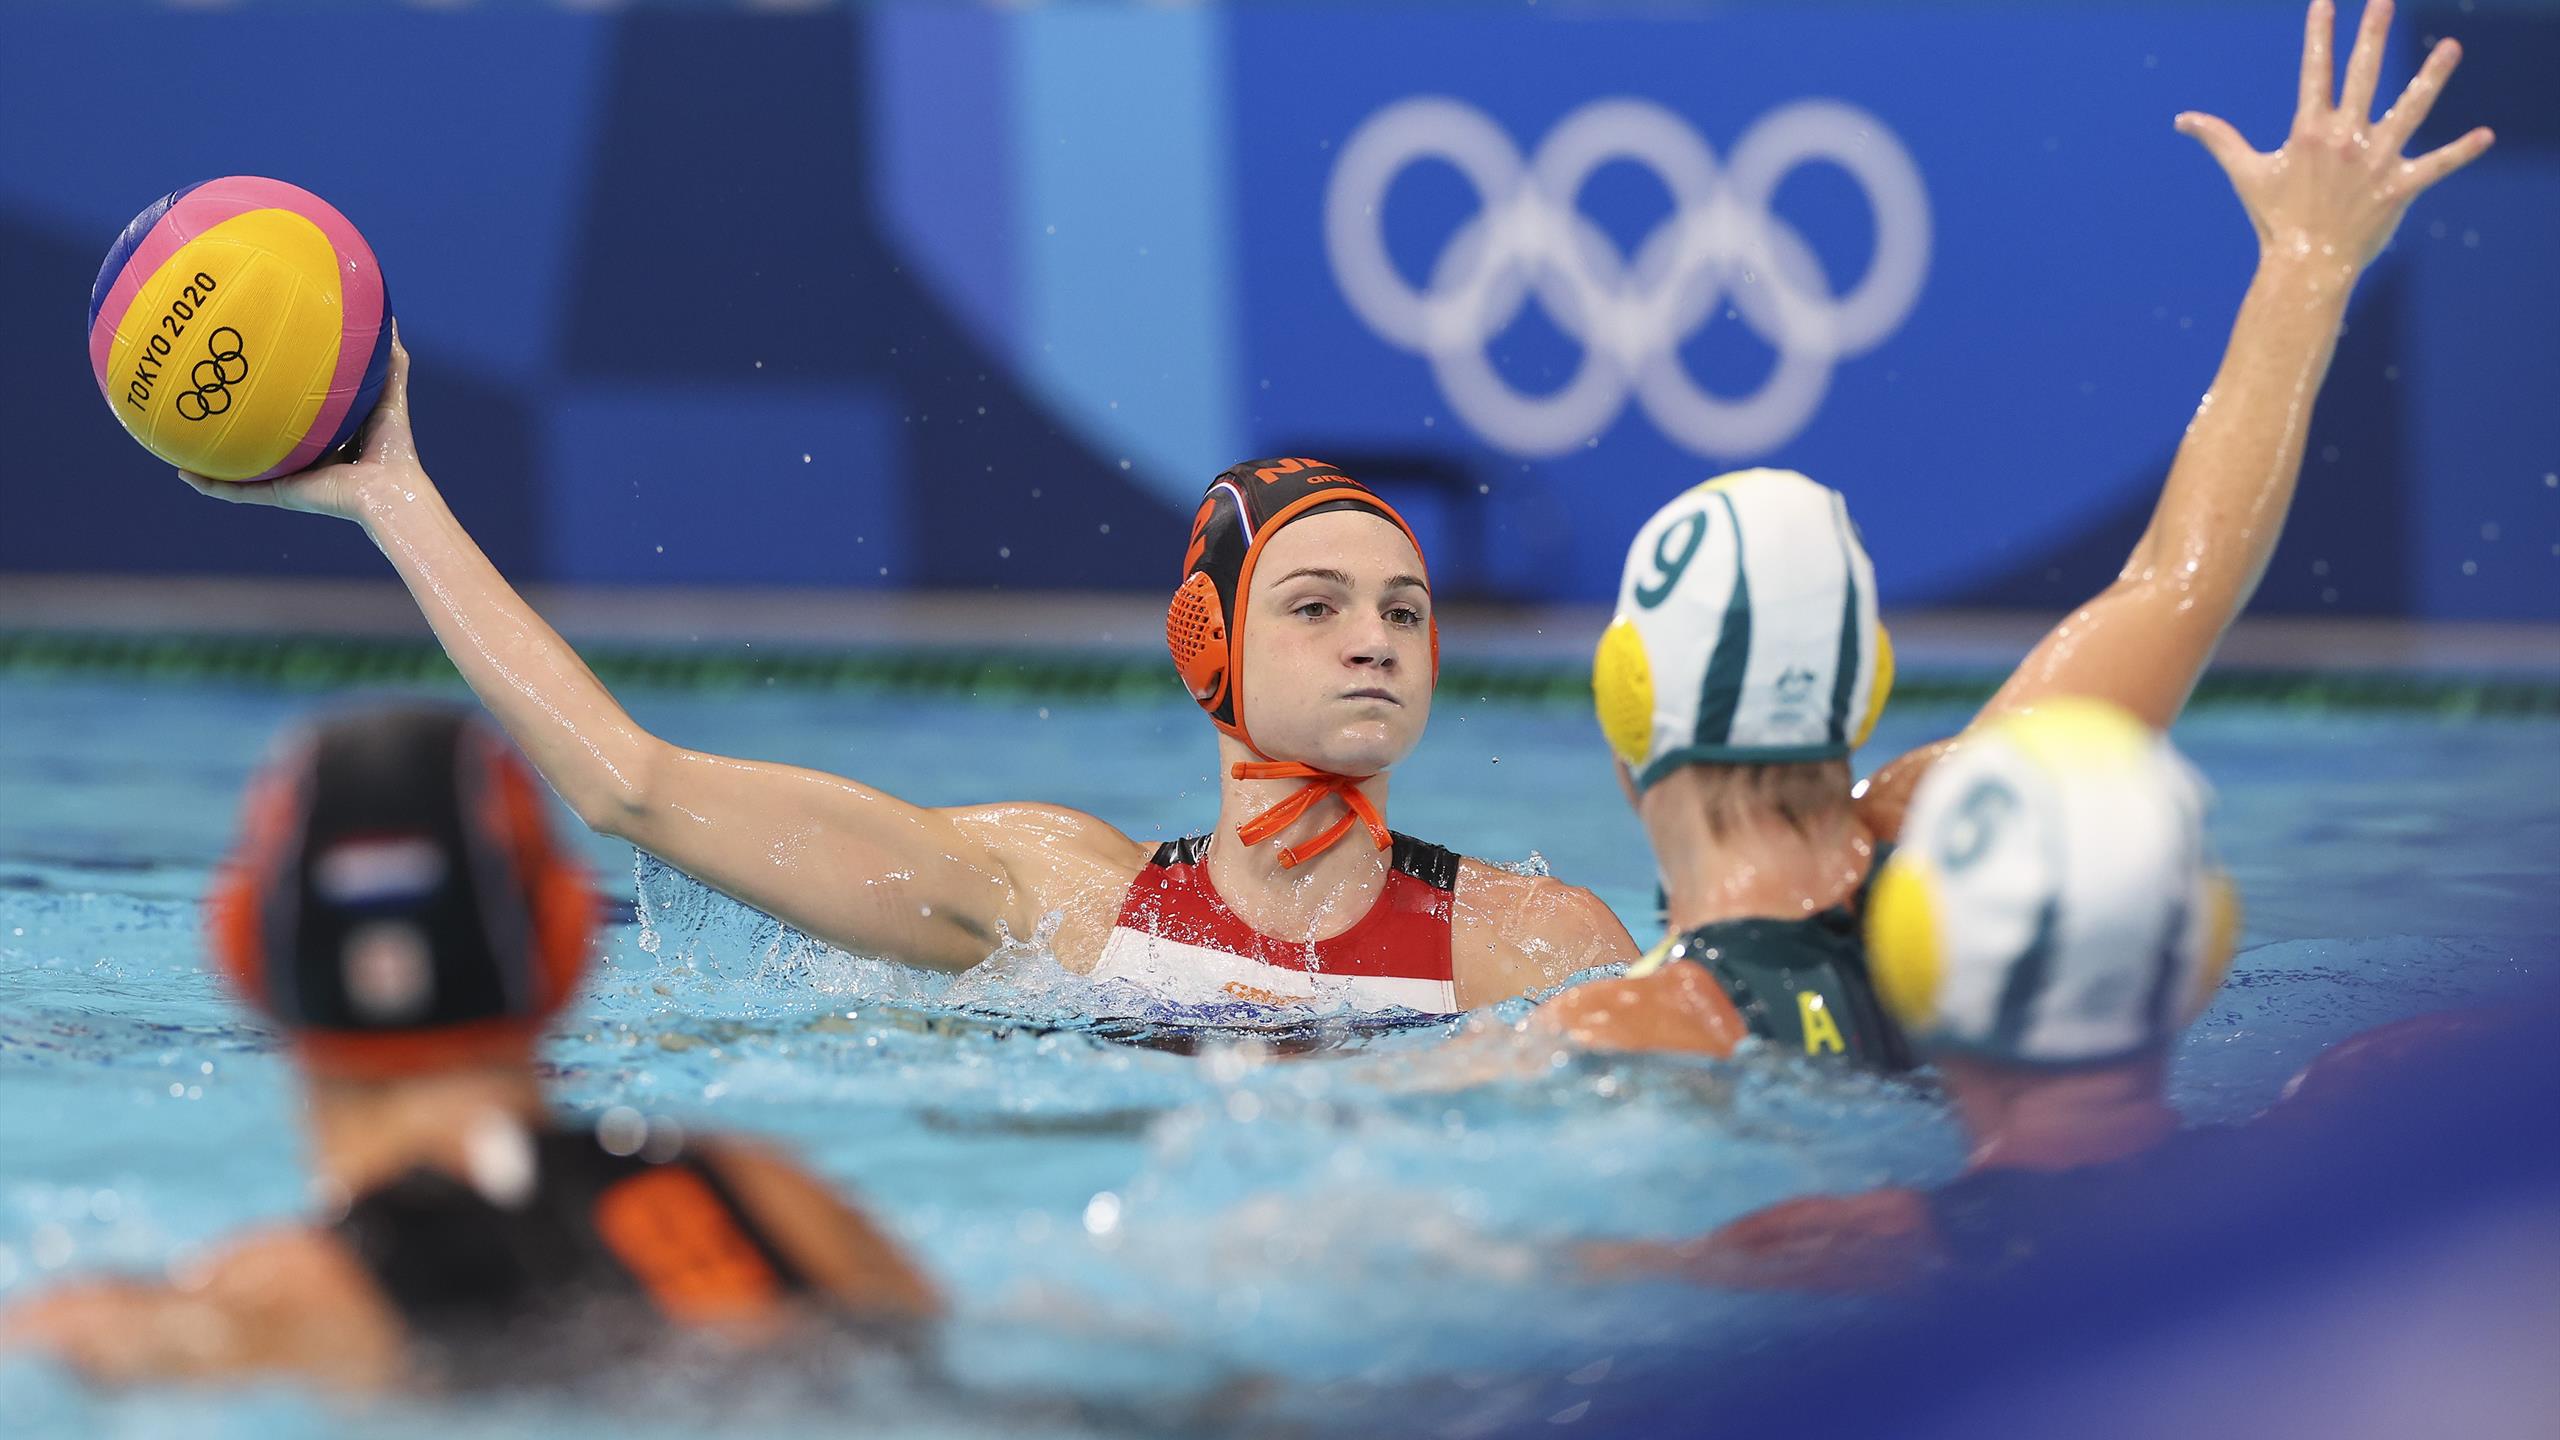 Tokyo 2020 |  Water polo players let victory over Australia pass